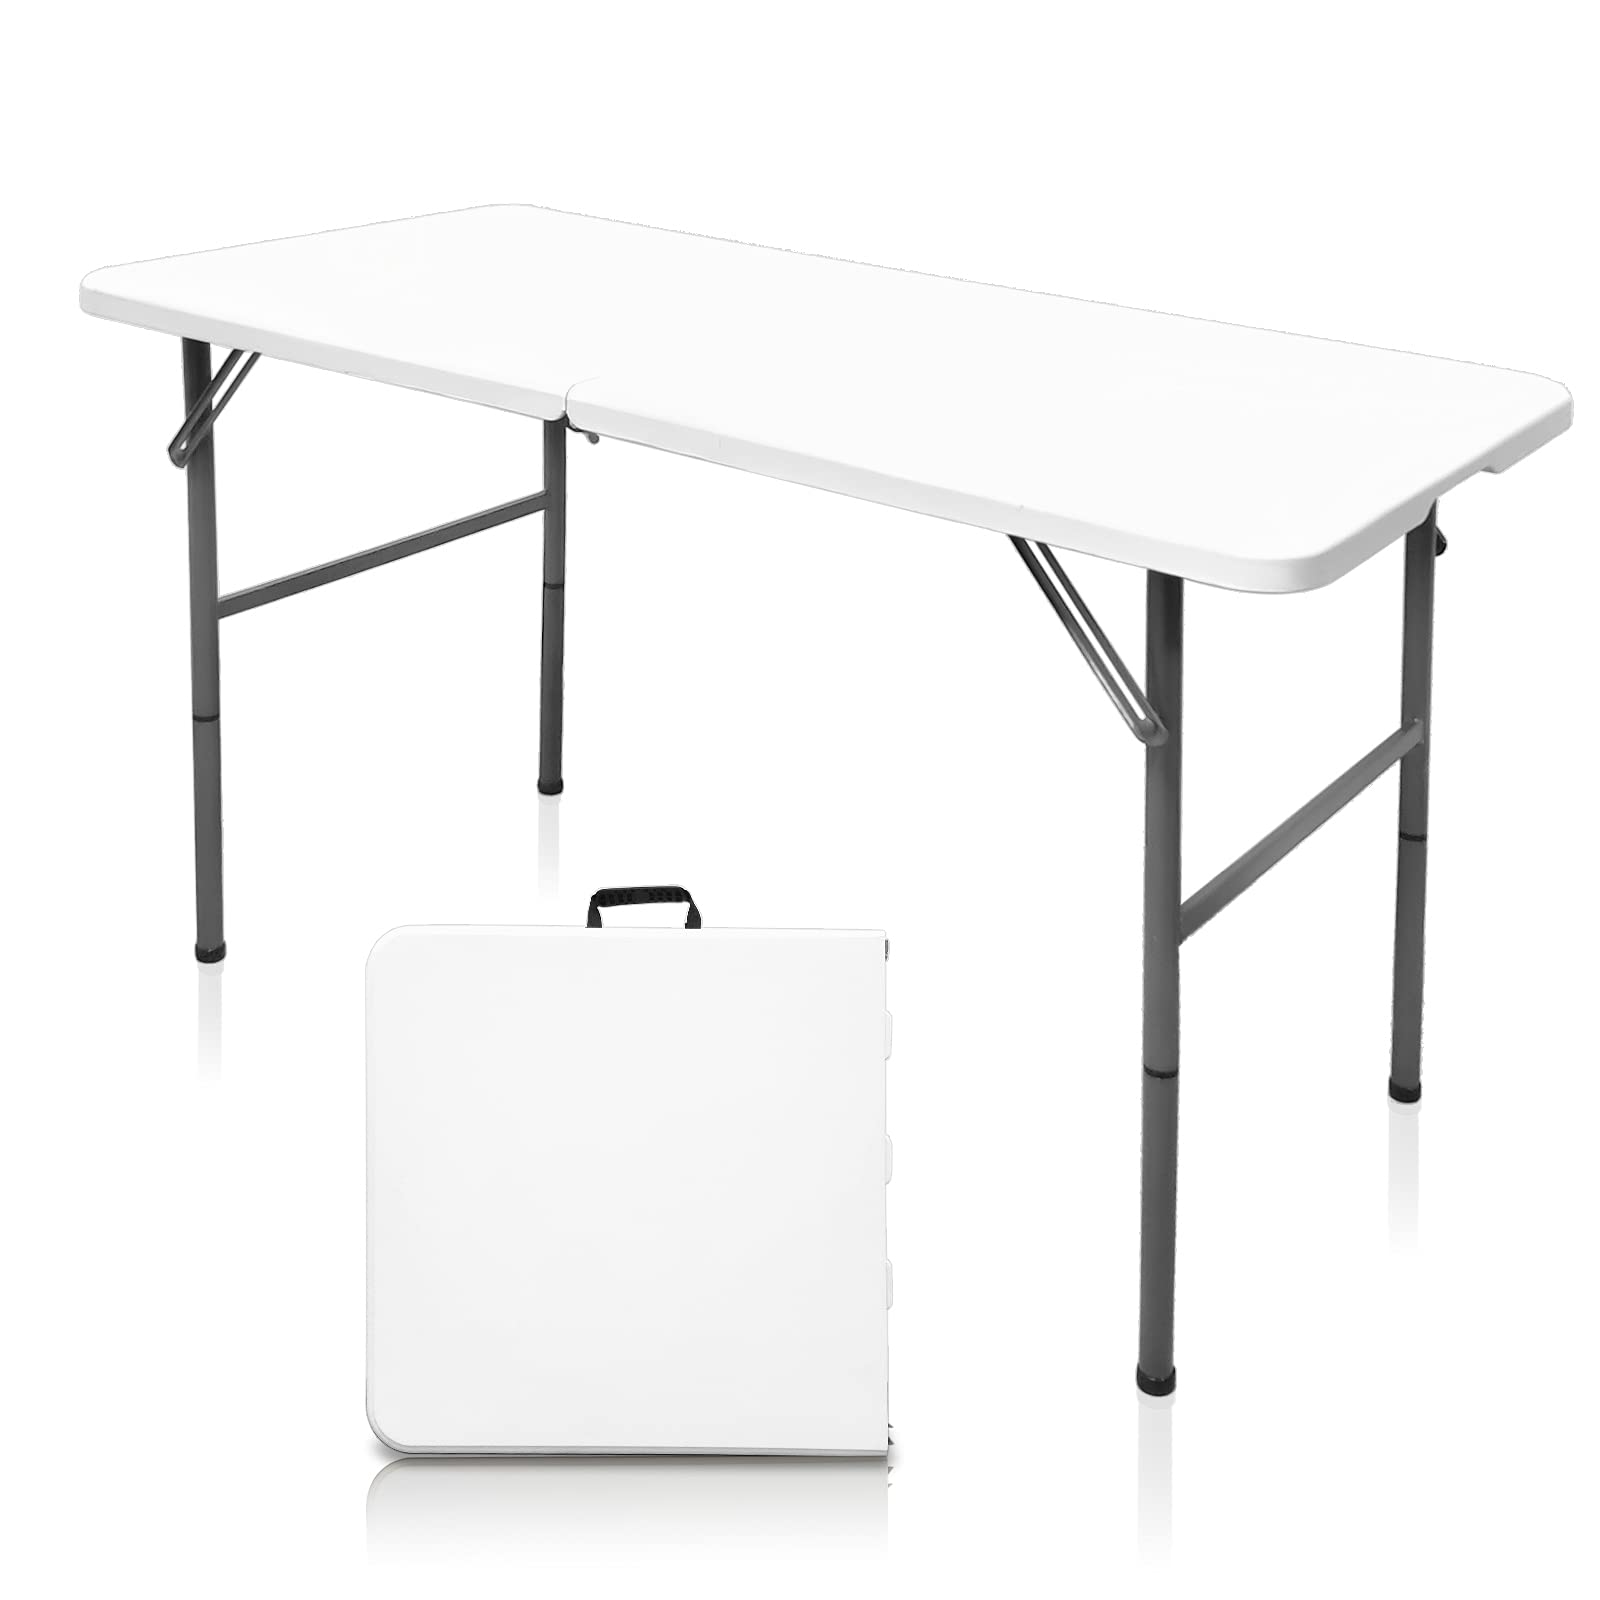 gocamptoo Folding Table,4ft Indoor Outdoor Heavy Duty Portable Folding Square Plastic Dining Table wHandle, Lock for Picnic, Par